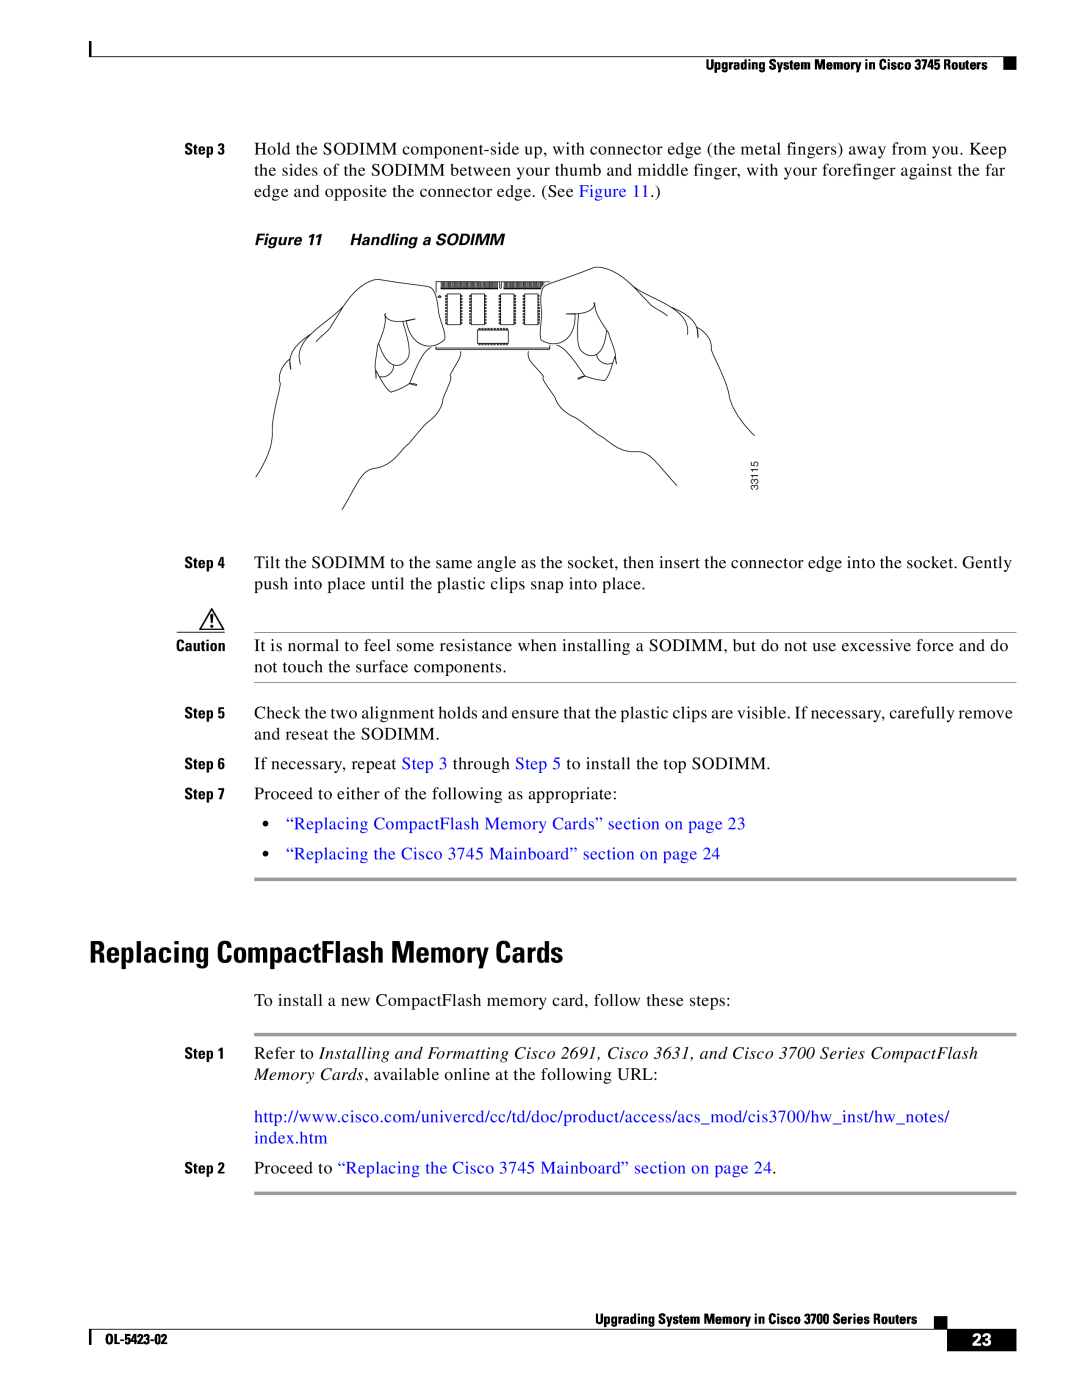 Cisco Systems 3745 Series manual “Replacing the Cisco 3745 Mainboard” section on page, Replacing CompactFlash Memory Cards 